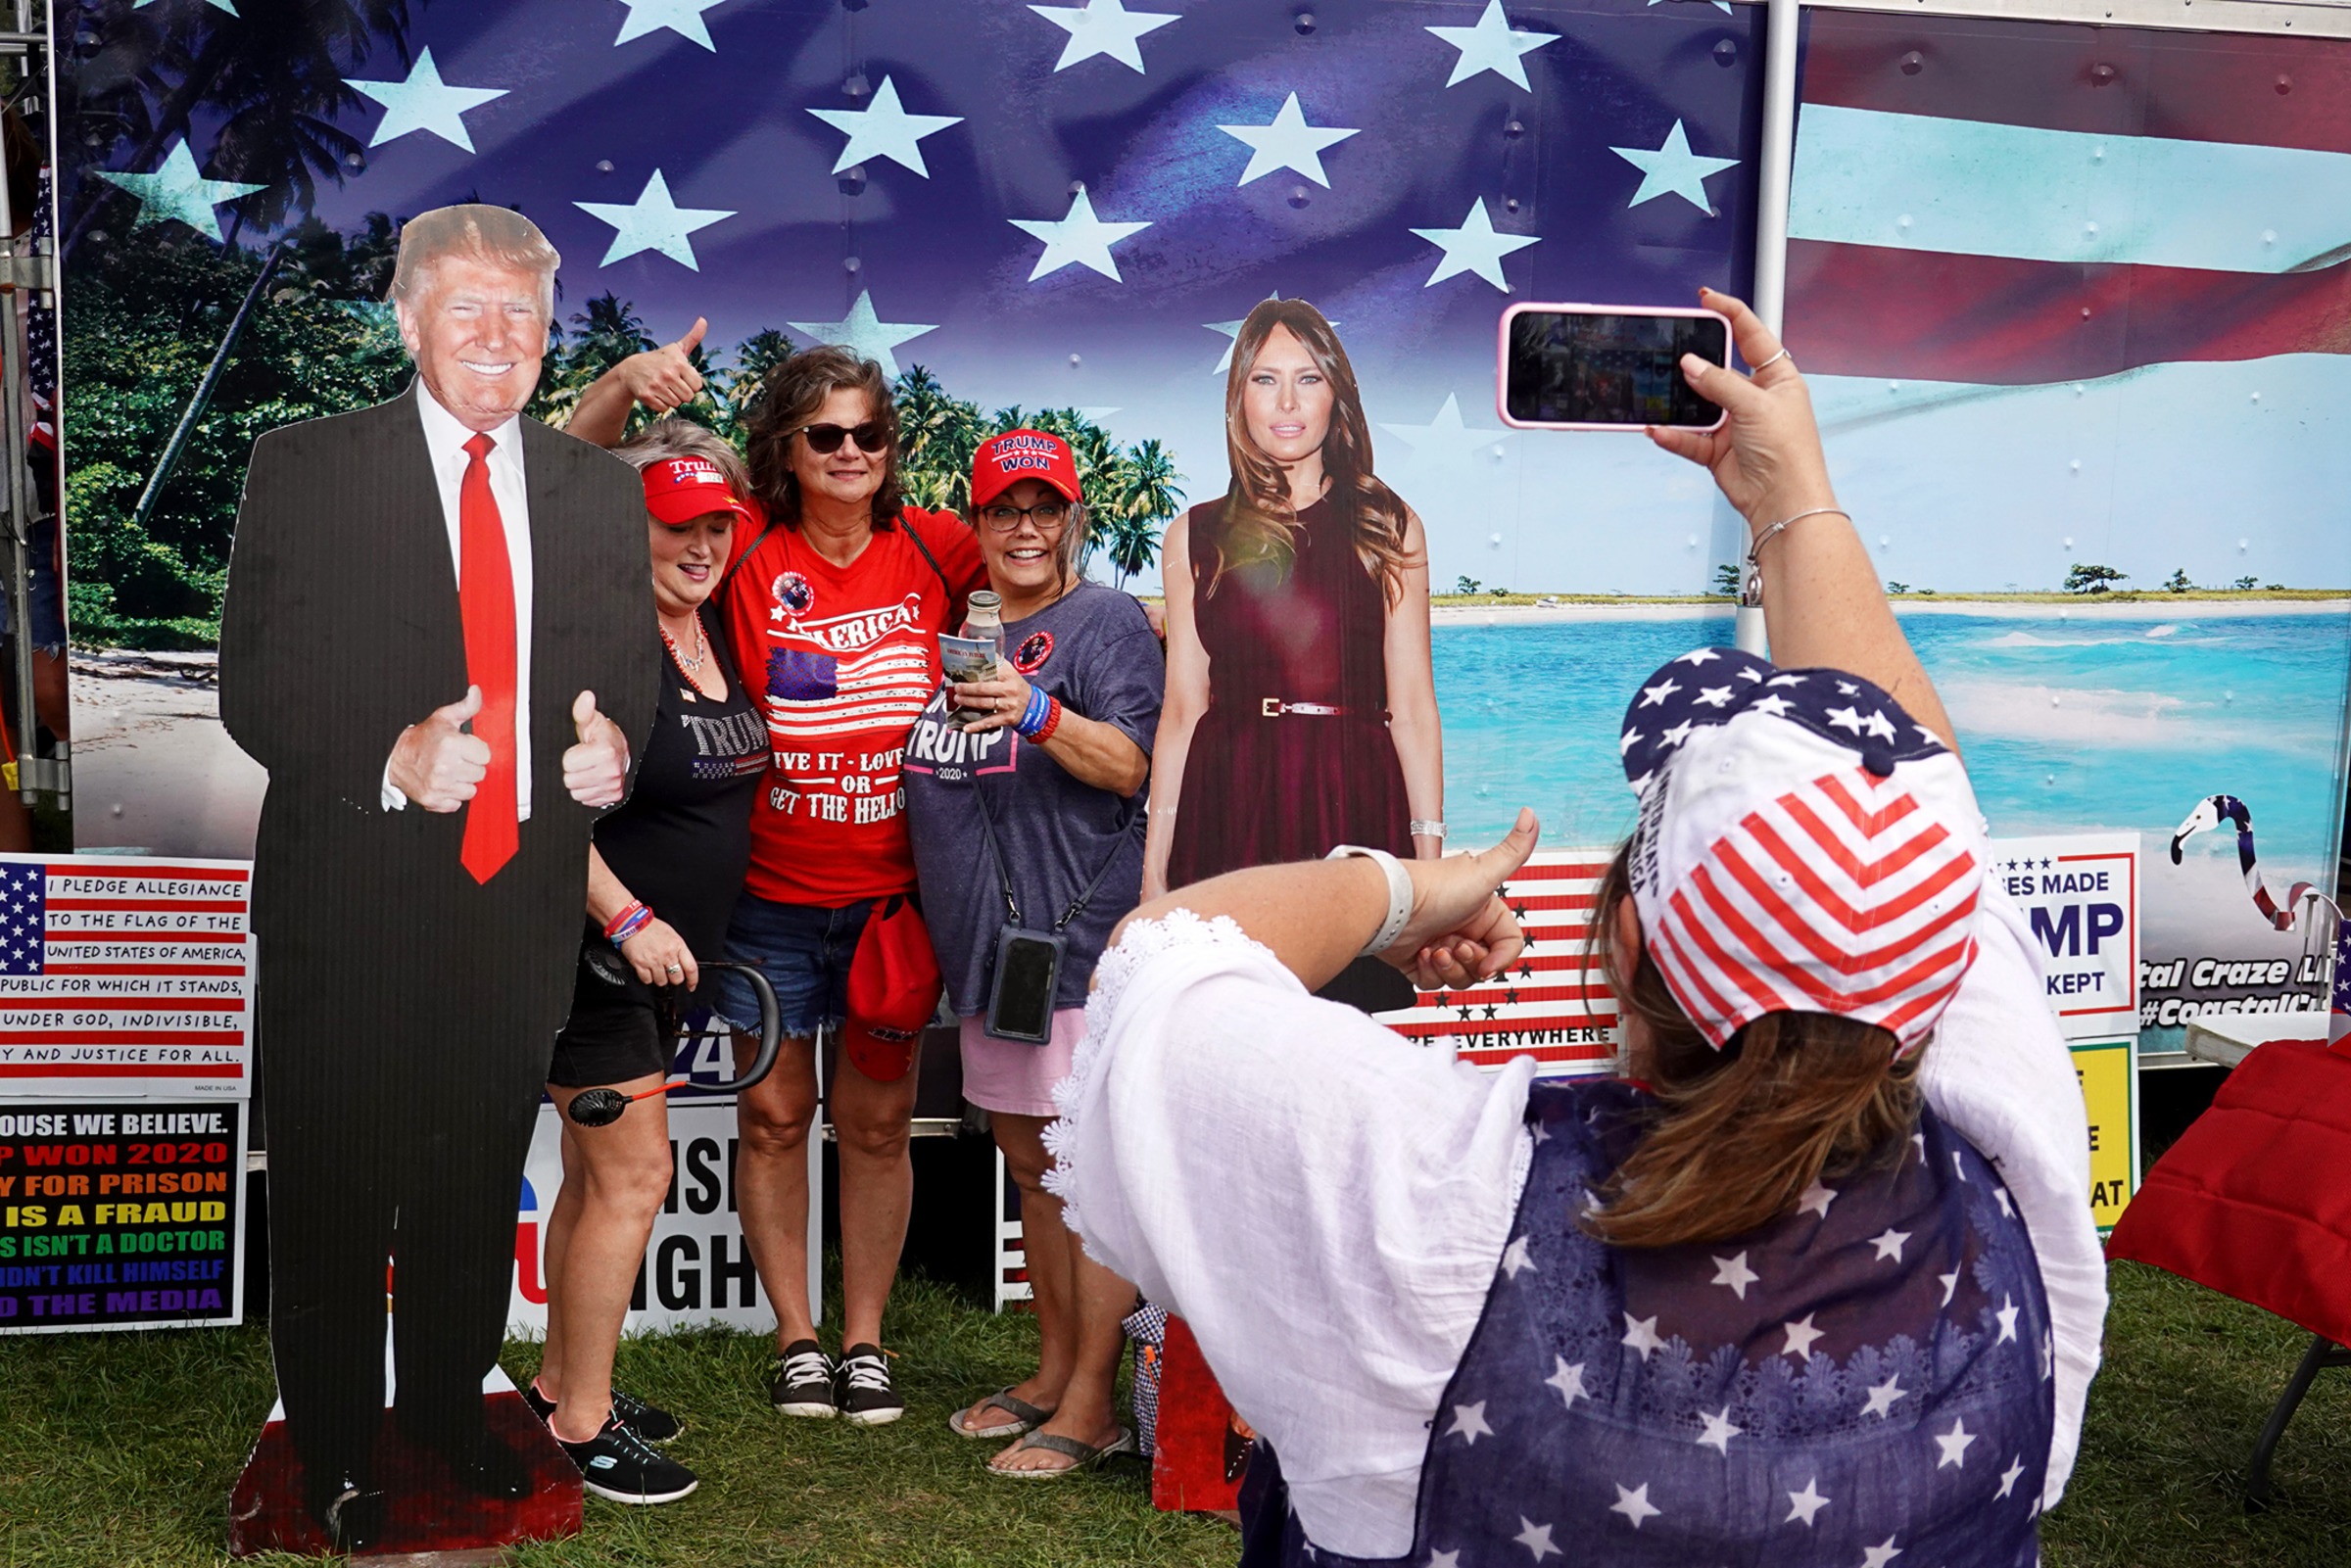 Attendees of a Trump rally in Des Moines, Iowa, pose with cardboard cutouts on Oct. 9, 2021. (Scott Olson—Getty Images)